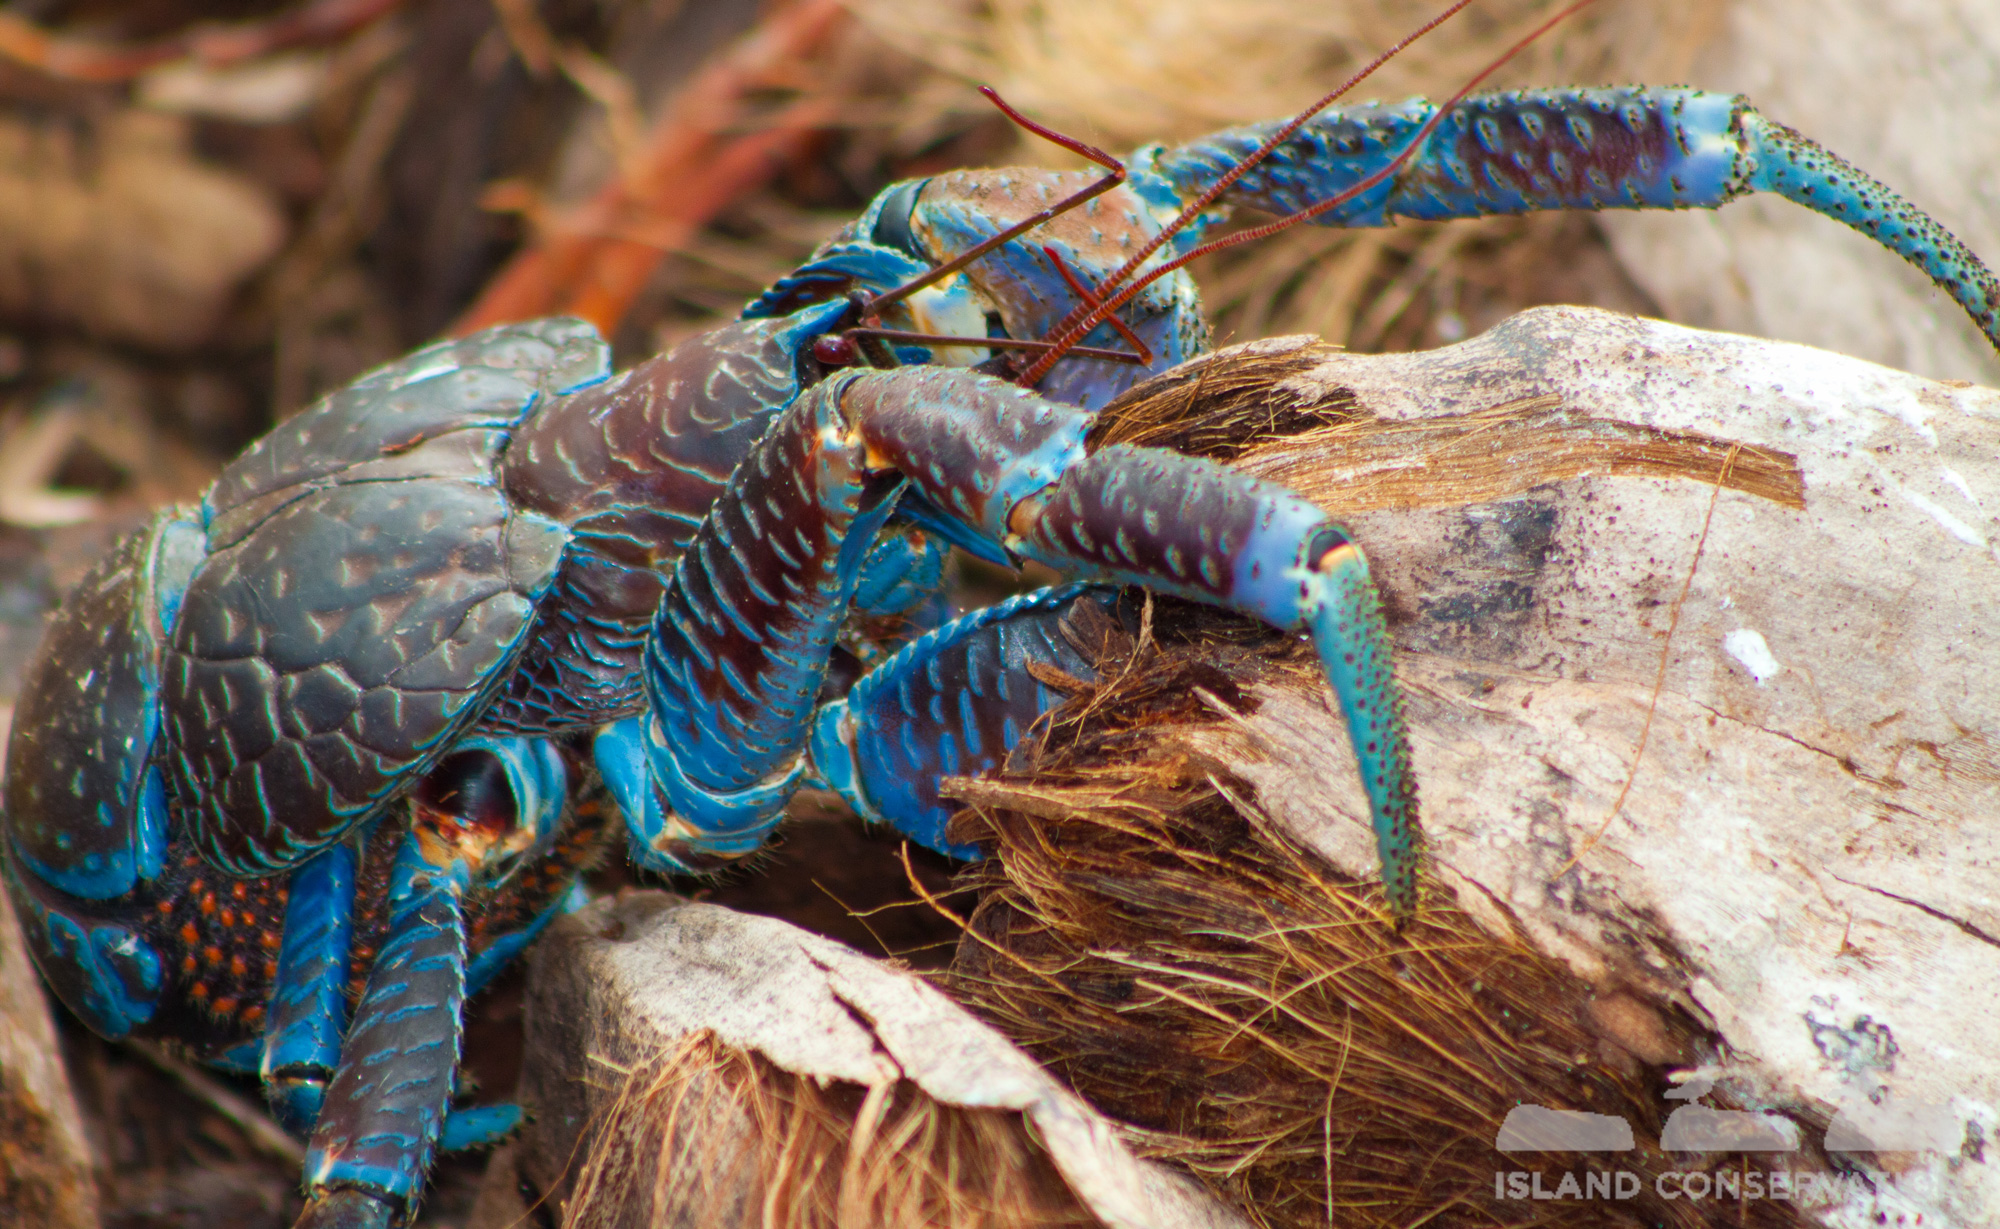 A coconut crab. Photo © Island Conservation